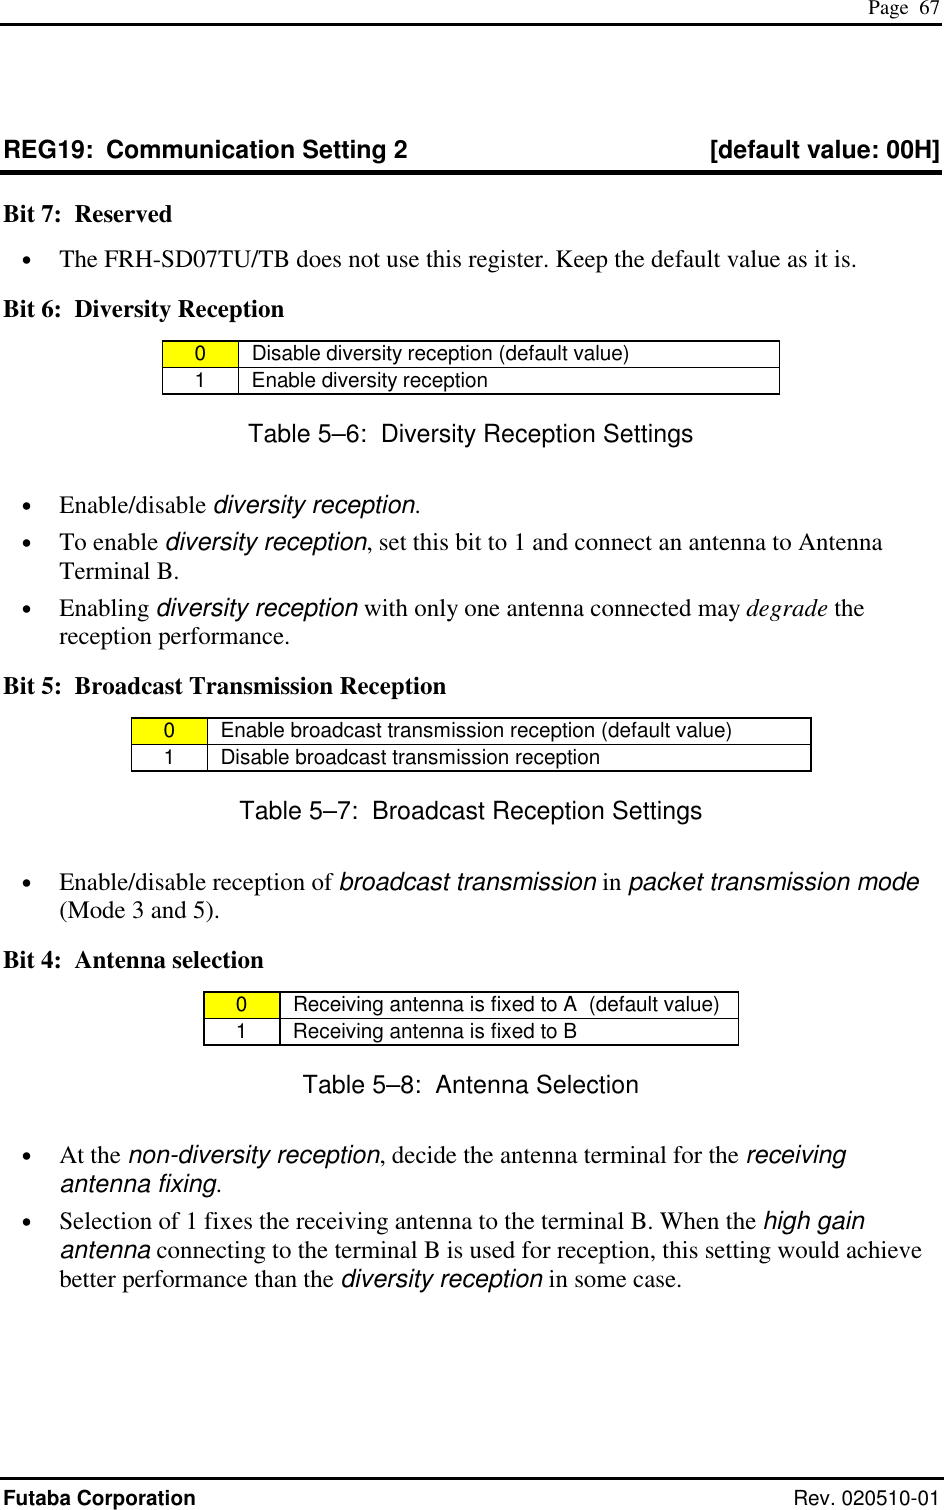  Page  67 Futaba Corporation Rev. 020510-01 REG19:  Communication Setting 2  [default value: 00H] Bit 7:  Reserved •  The FRH-SD07TU/TB does not use this register. Keep the default value as it is. Bit 6:  Diversity Reception 0   Disable diversity reception (default value) 1   Enable diversity reception Table 5–6:  Diversity Reception Settings •  Enable/disable diversity reception. •  To enable diversity reception, set this bit to 1 and connect an antenna to Antenna Terminal B. •  Enabling diversity reception with only one antenna connected may degrade the reception performance. Bit 5:  Broadcast Transmission Reception 0   Enable broadcast transmission reception (default value) 1   Disable broadcast transmission reception Table 5–7:  Broadcast Reception Settings •  Enable/disable reception of broadcast transmission in packet transmission mode (Mode 3 and 5). Bit 4:  Antenna selection 0   Receiving antenna is fixed to A  (default value) 1   Receiving antenna is fixed to B Table 5–8:  Antenna Selection •  At the non-diversity reception, decide the antenna terminal for the receiving antenna fixing. •  Selection of 1 fixes the receiving antenna to the terminal B. When the high gain antenna connecting to the terminal B is used for reception, this setting would achieve better performance than the diversity reception in some case. 